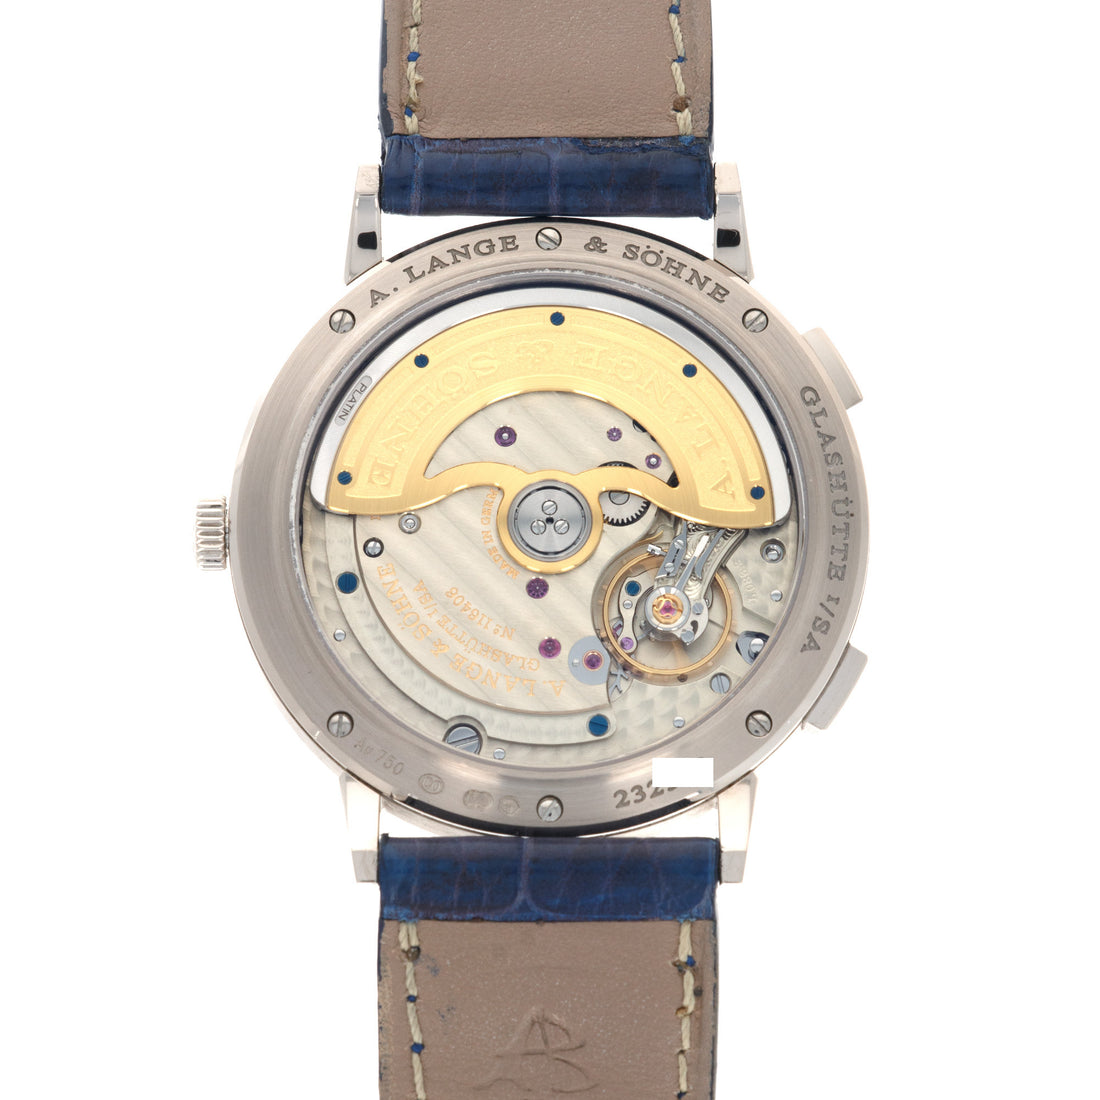 A. Lange & Sohne White Gold Dual TIme Watch, Ref. 386.026